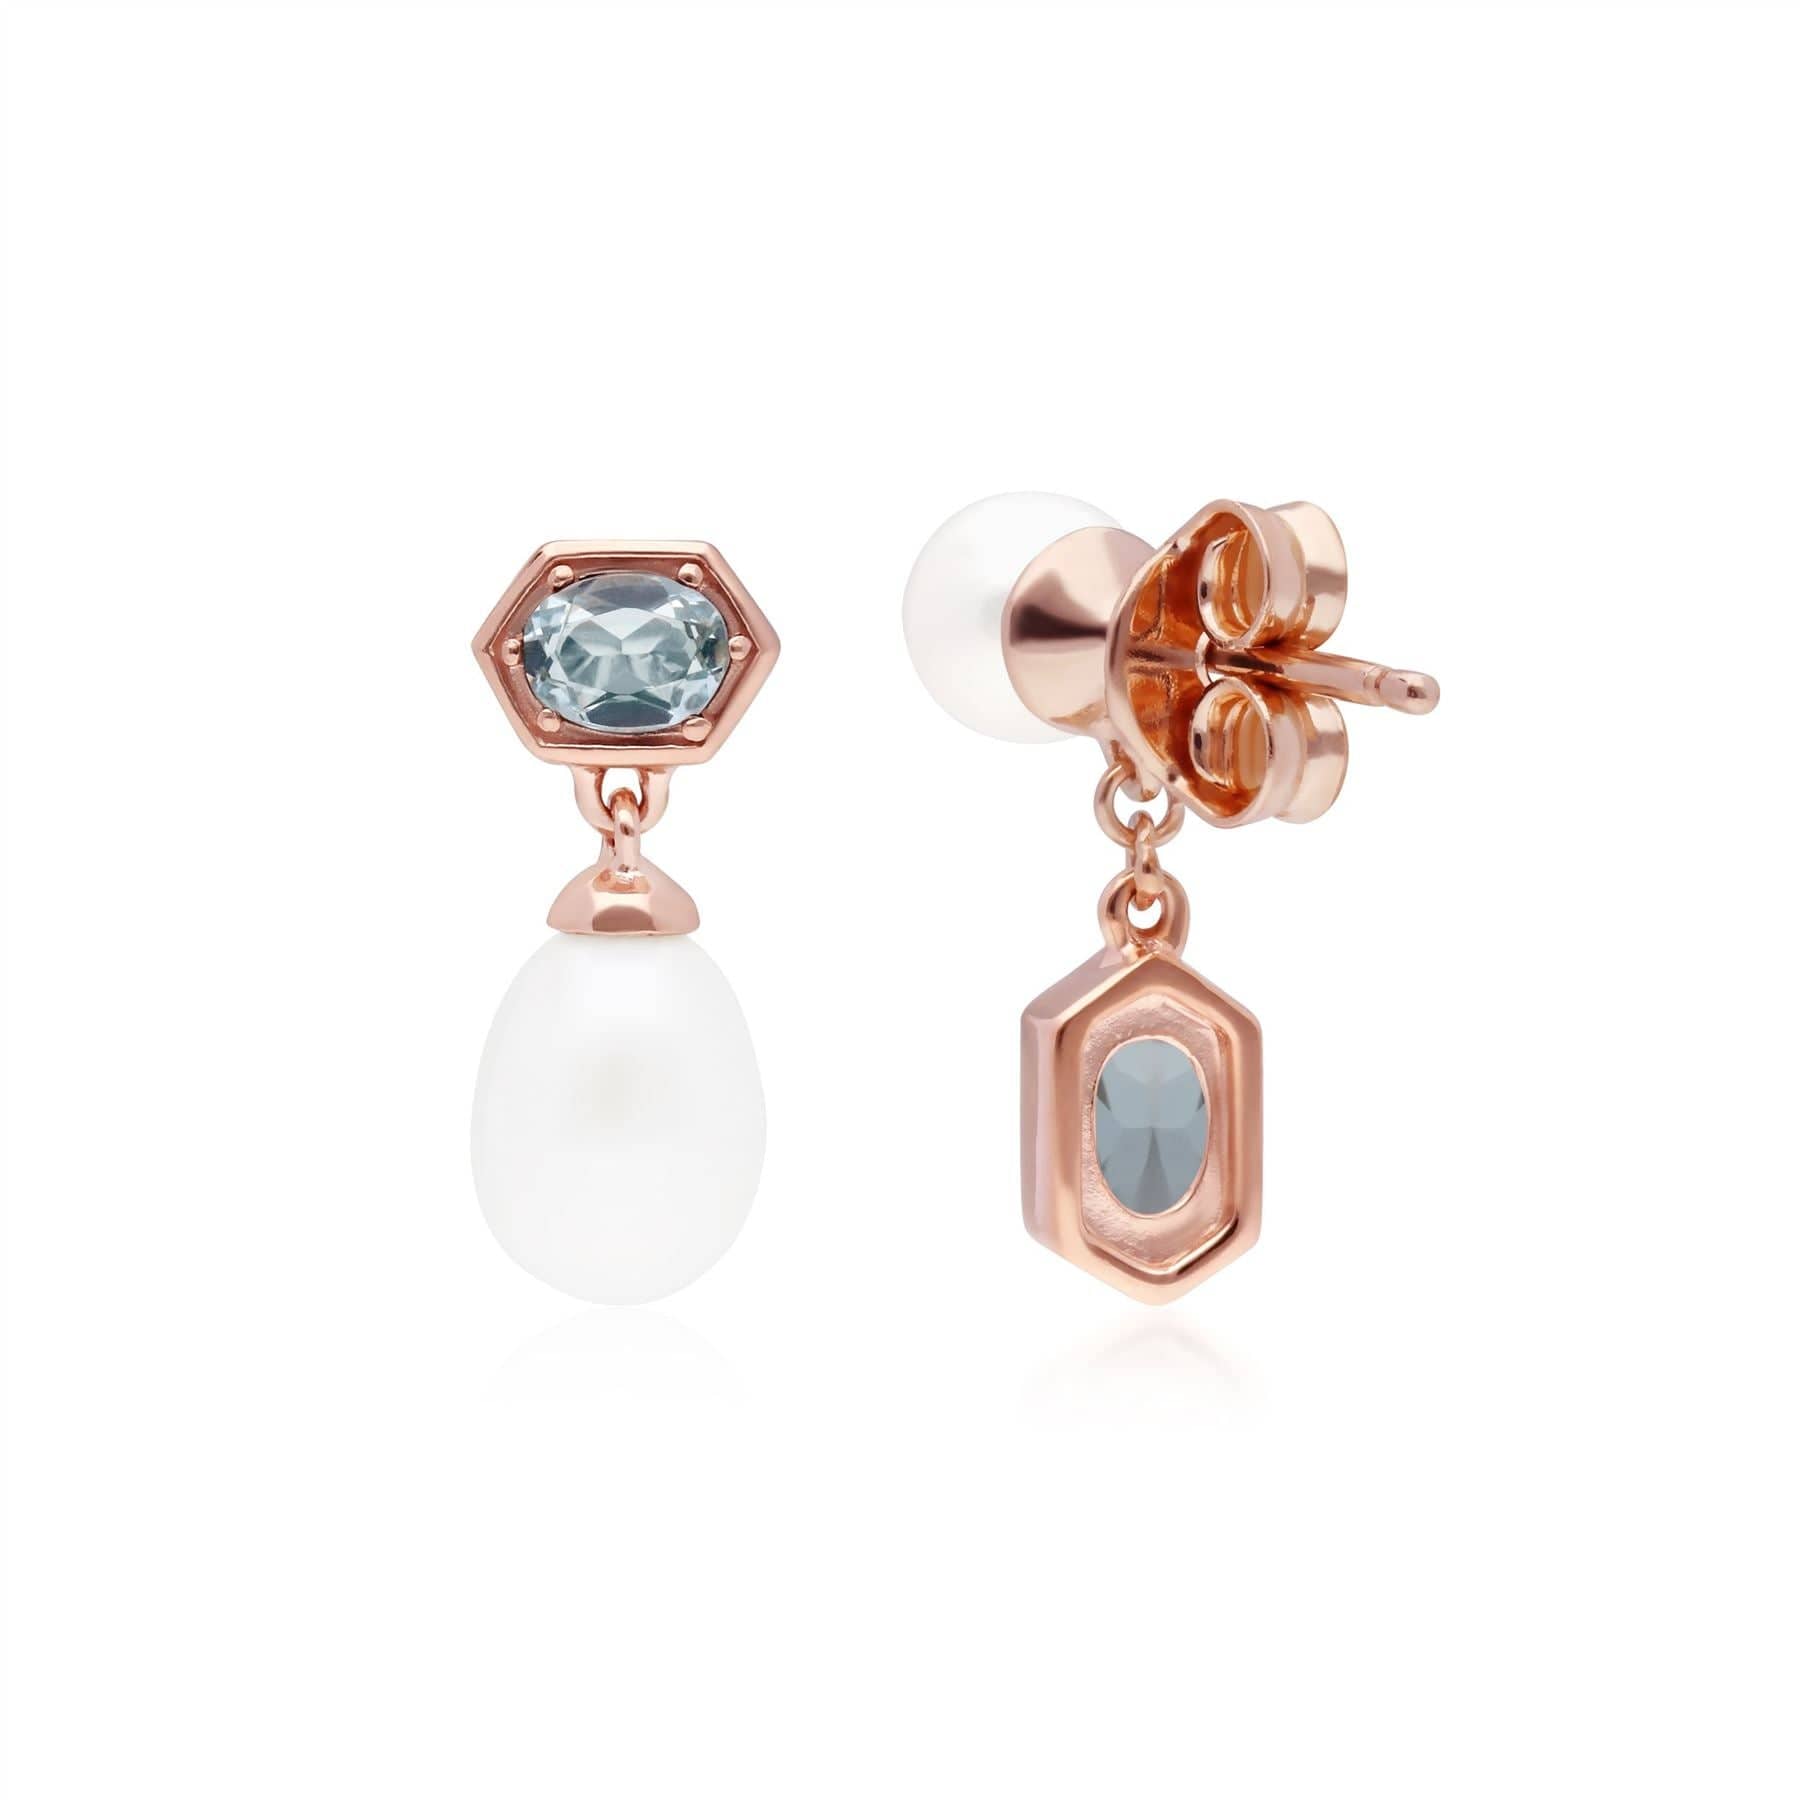 Modern Pearl & Blue Topaz Mismatched Drop Earrings in Rose Gold Plated Silver - Gemondo